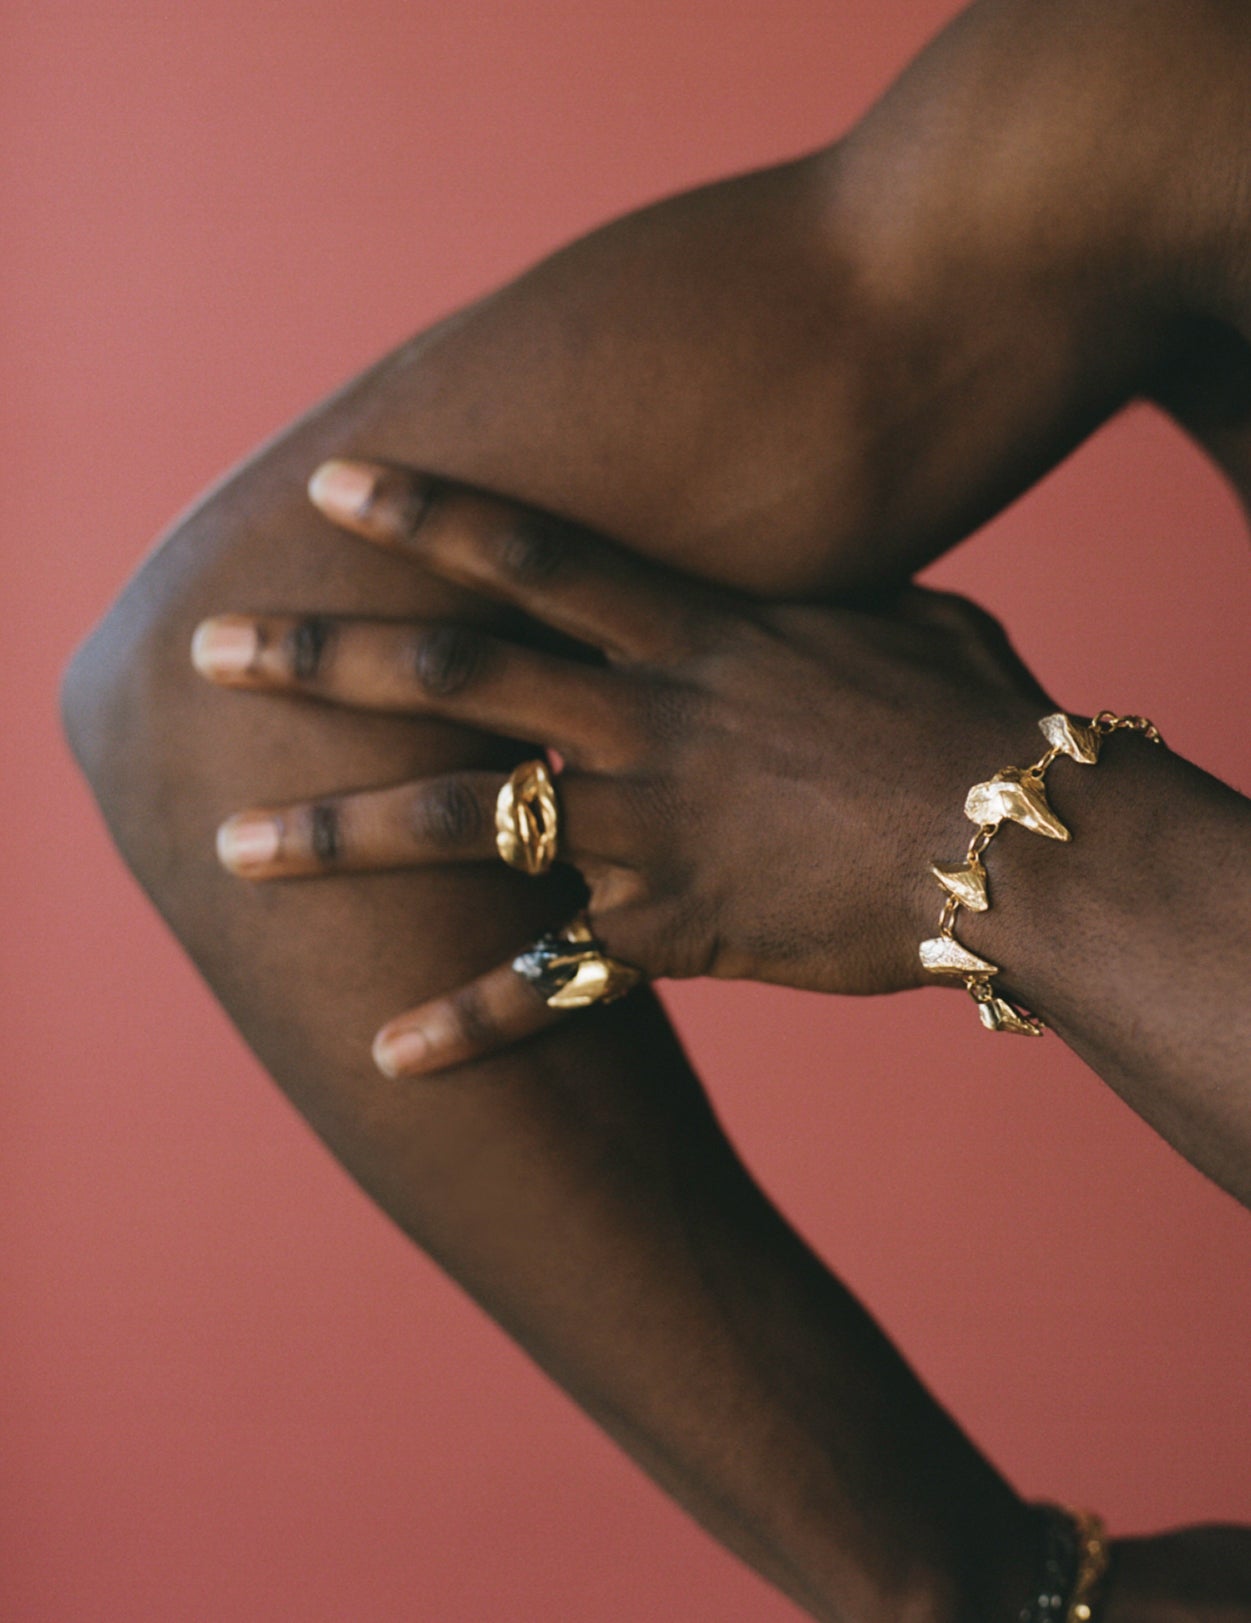 Model wearing gold vermeil rings and bracelet inspired by Irish history